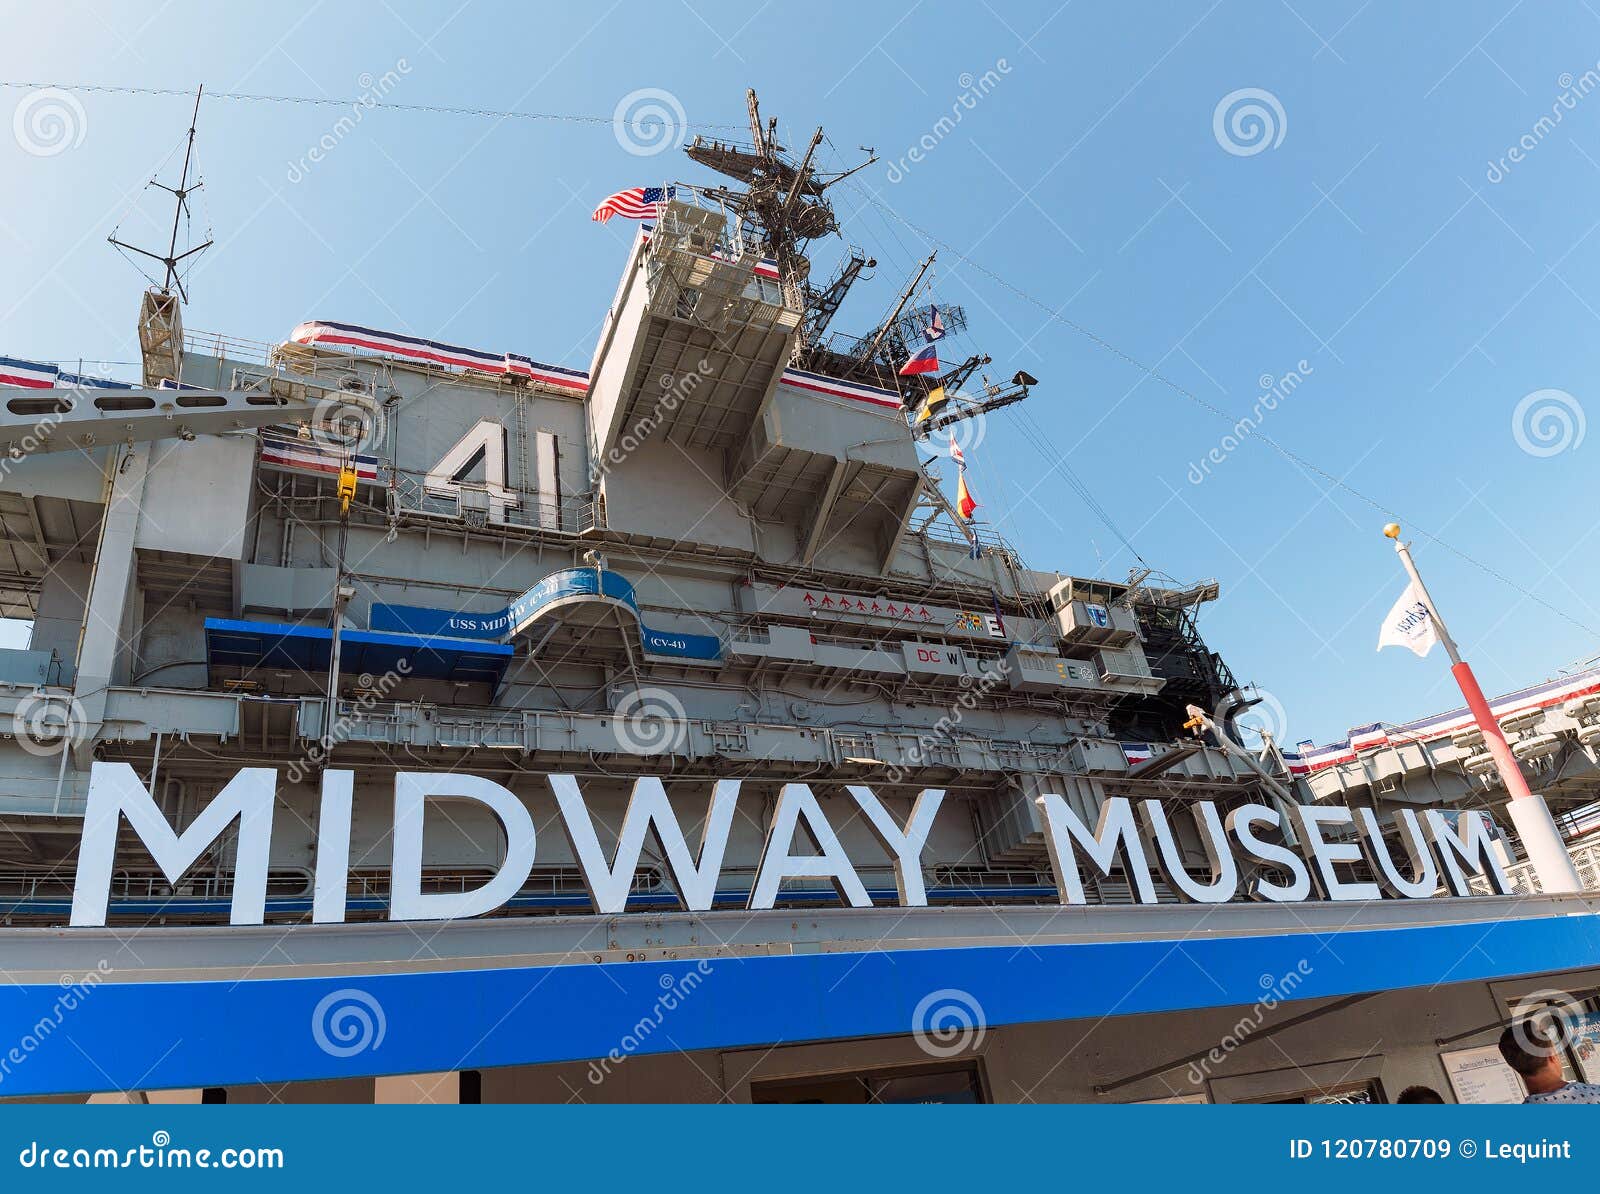 USS Midway Museum Aircraft Carrier San Diego California Aerial Panorama Poster